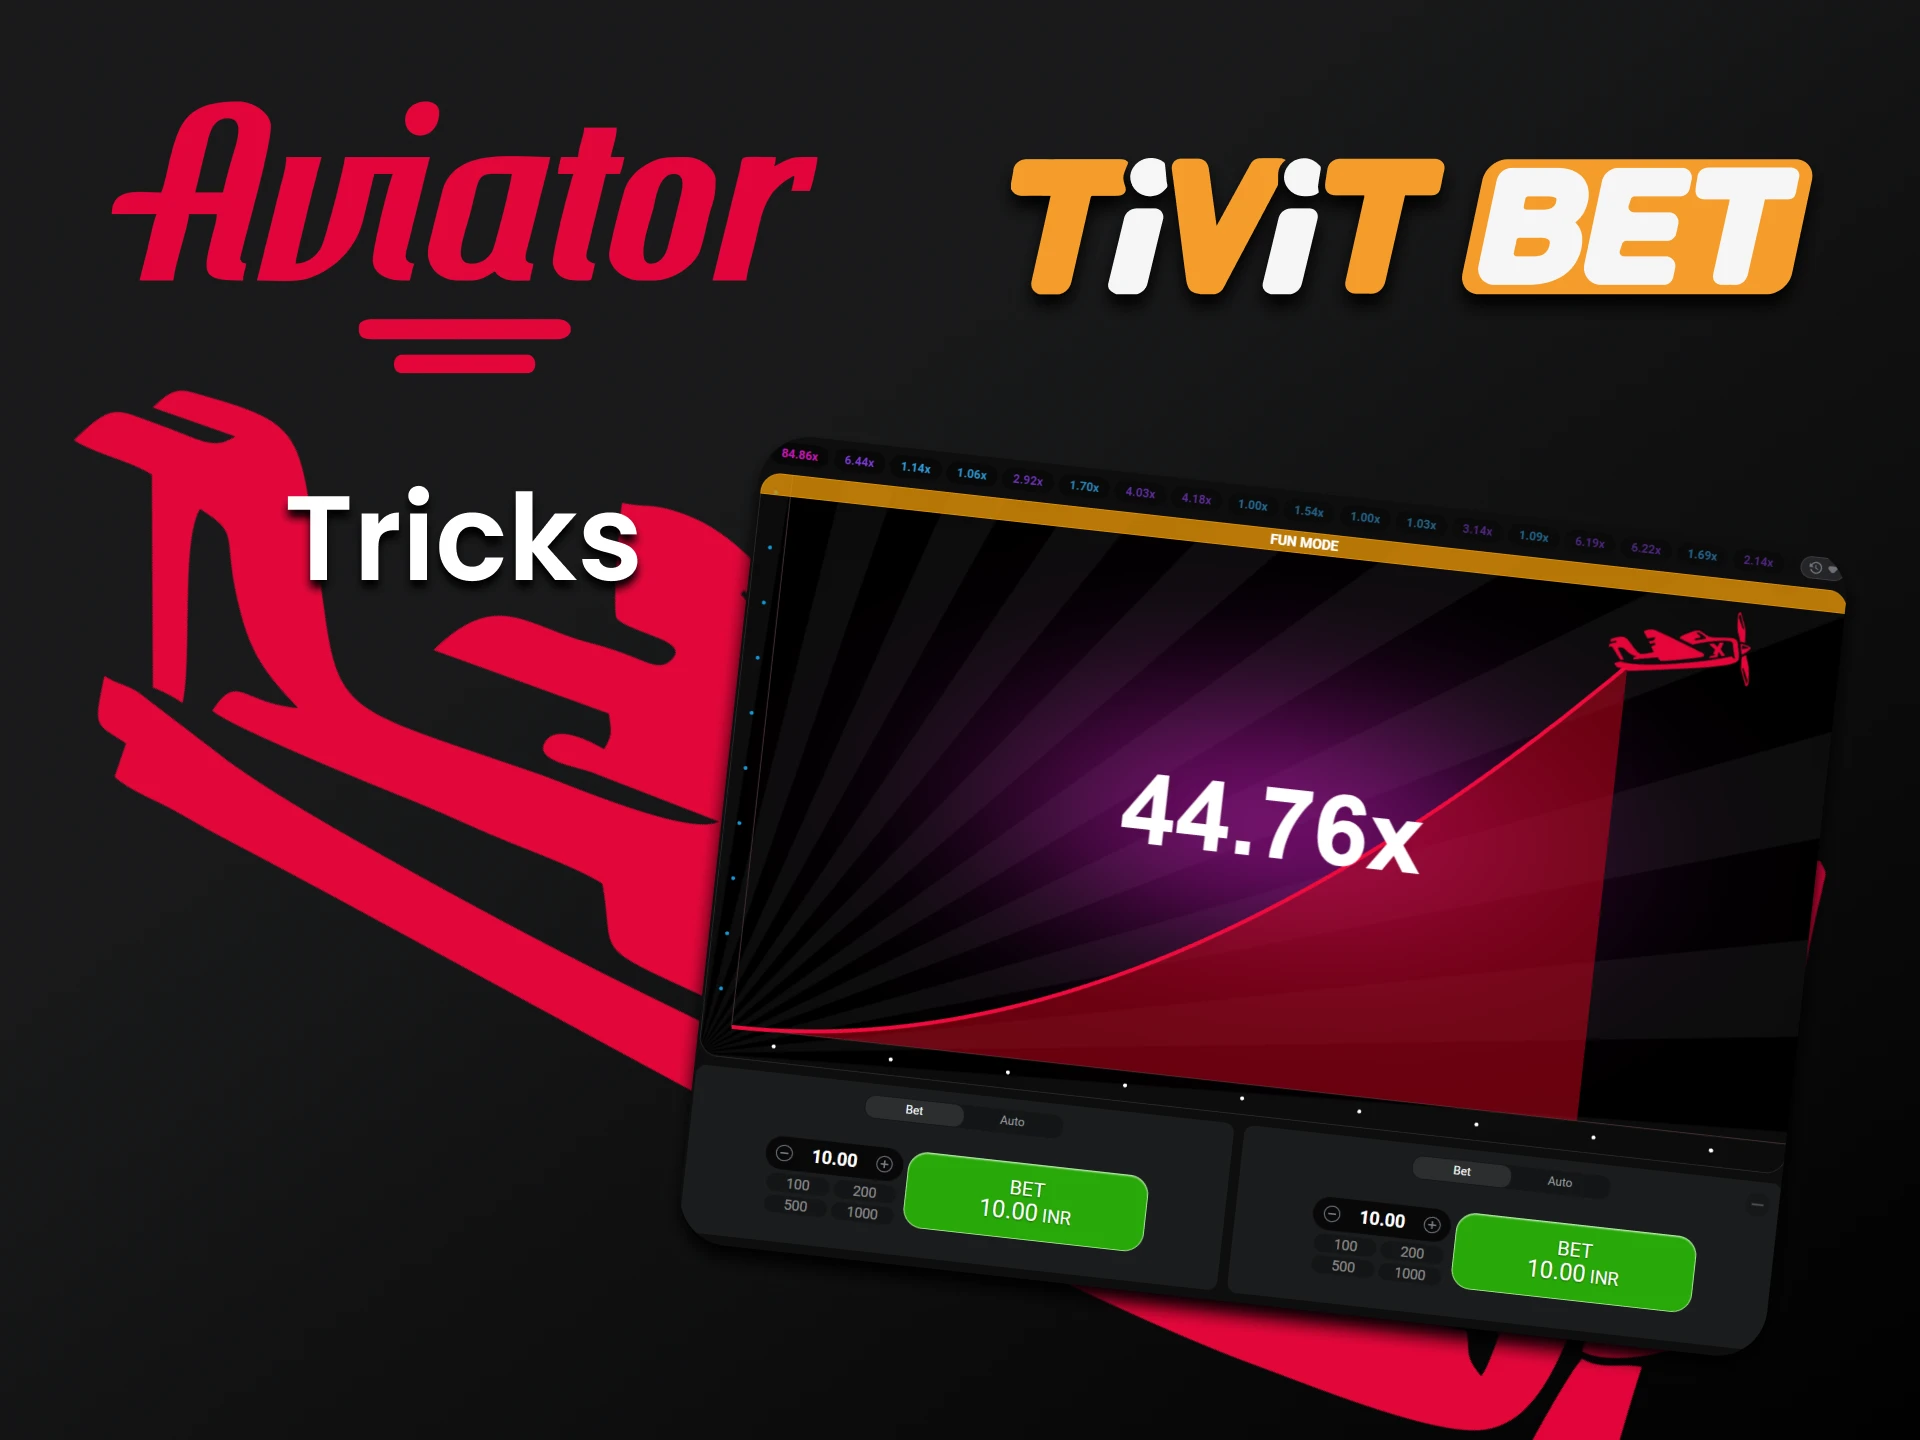 We will tell you about the tricks to win in Aviator on Tivitbet.